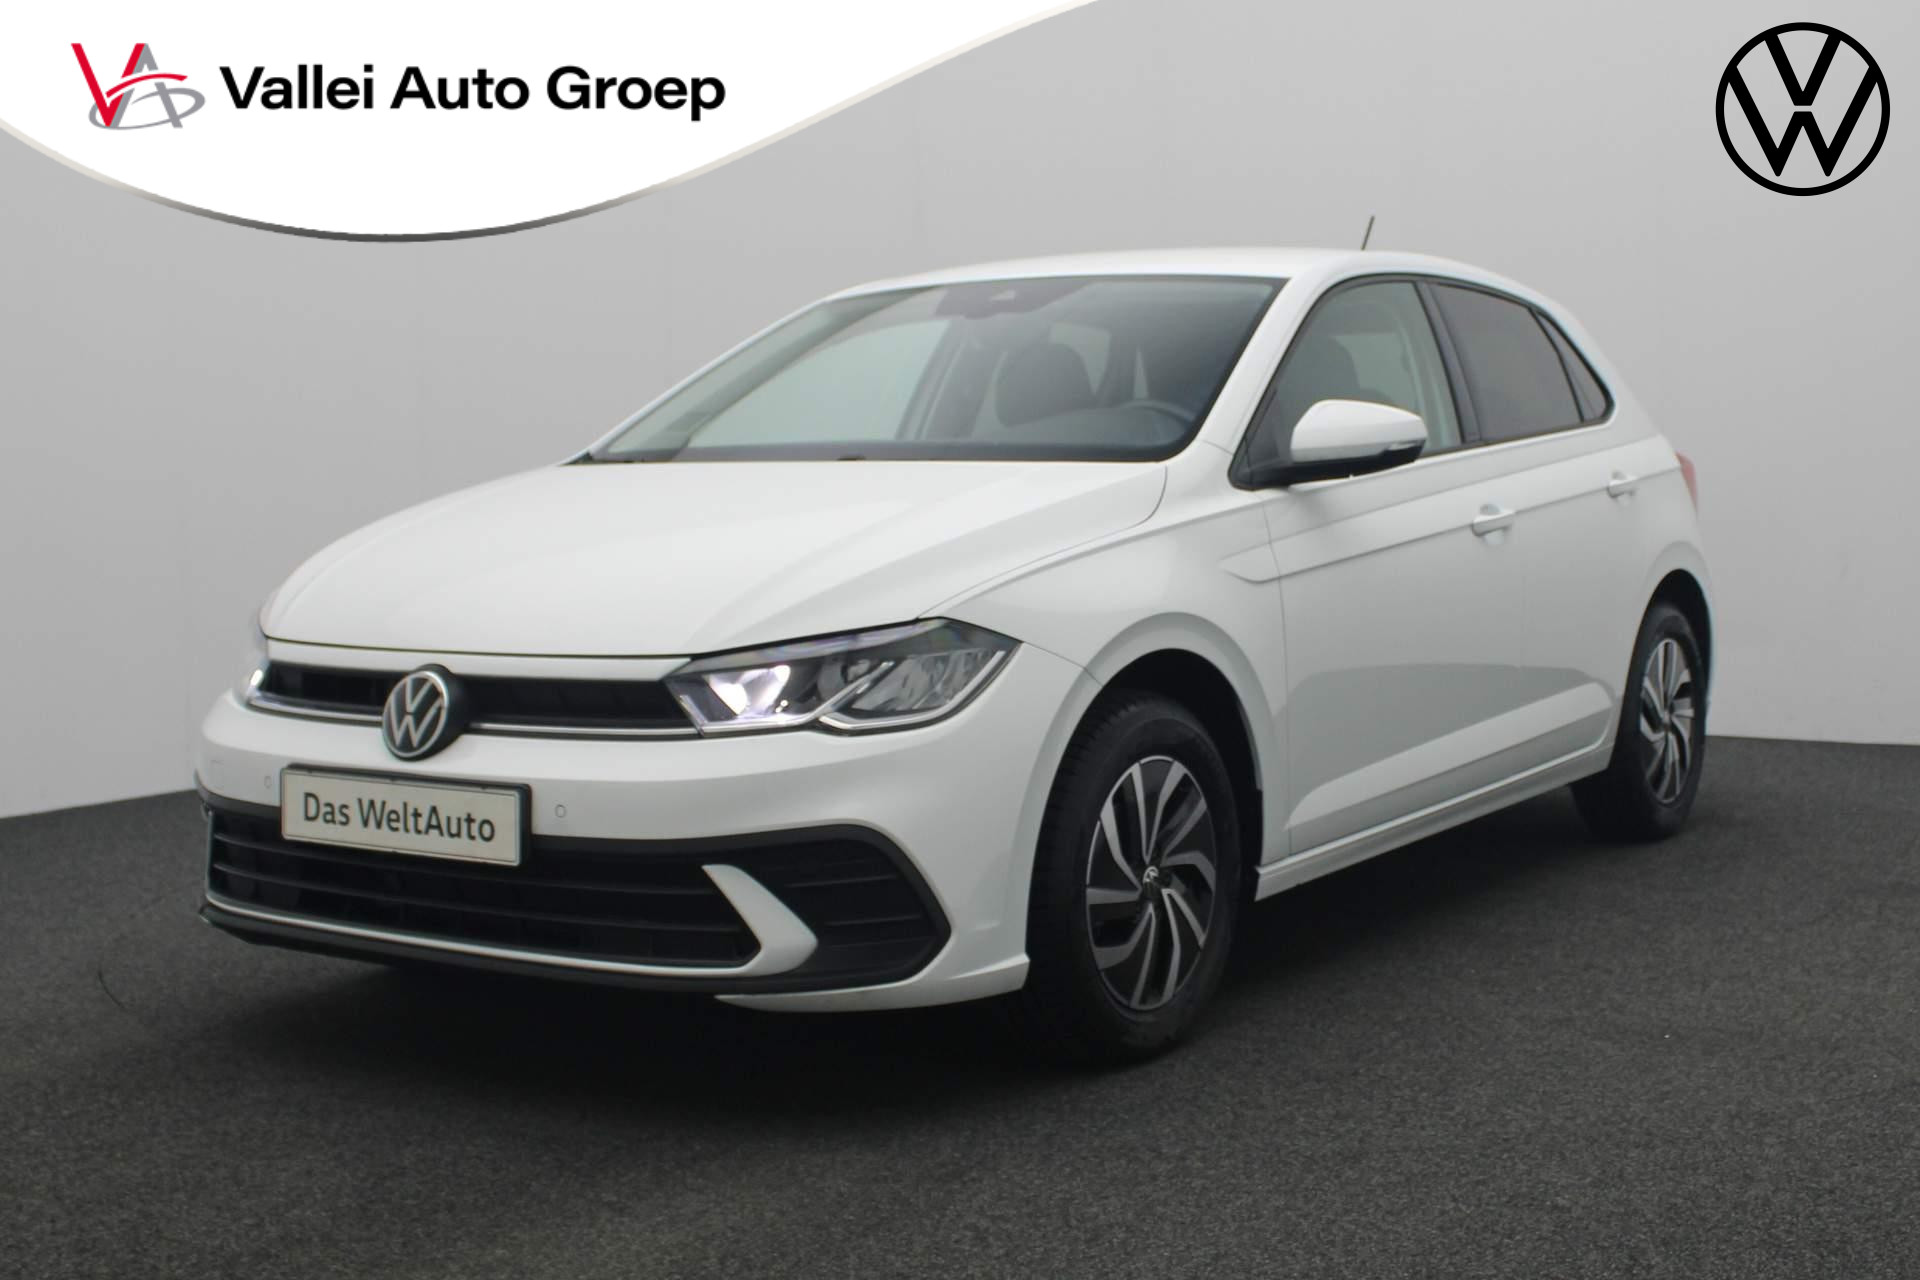 Volkswagen Polo 1.0 TSI 95PK Life | Parkeersensoren voor/achter | ACC | Clima | Apple Carplay / Android Auto | 15 inch | LED | Digital Cockpit